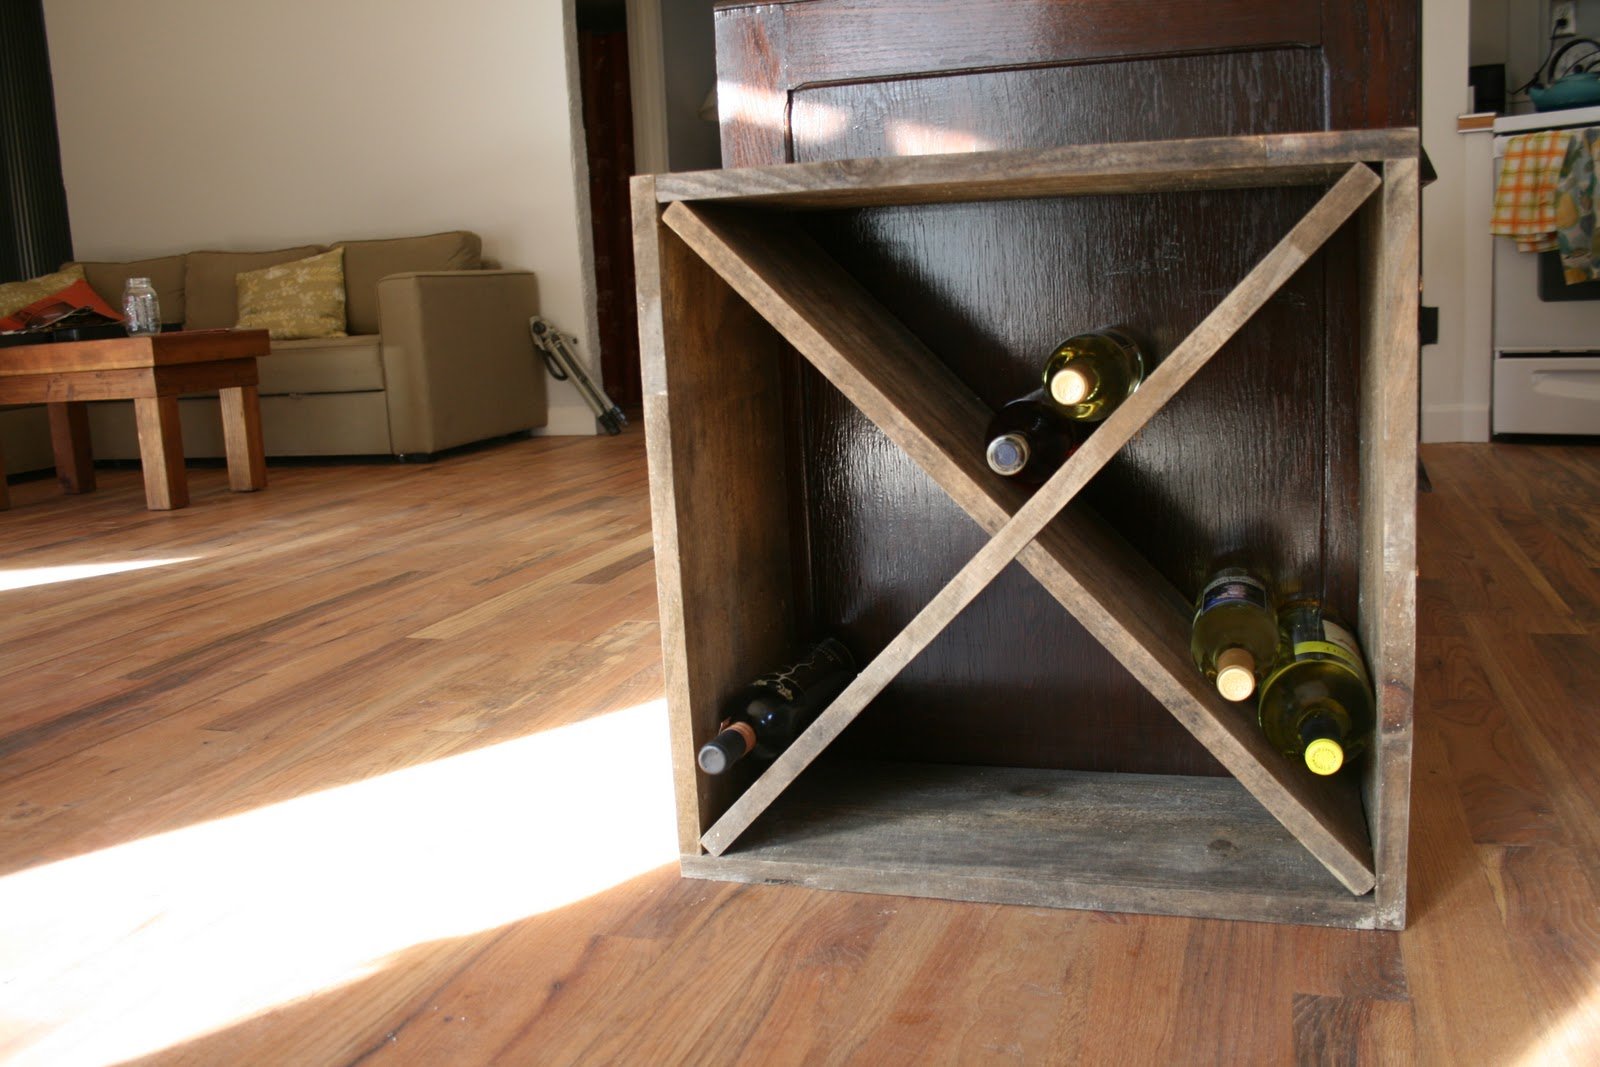 off the map: How to: Build a diamond shaped wine rack